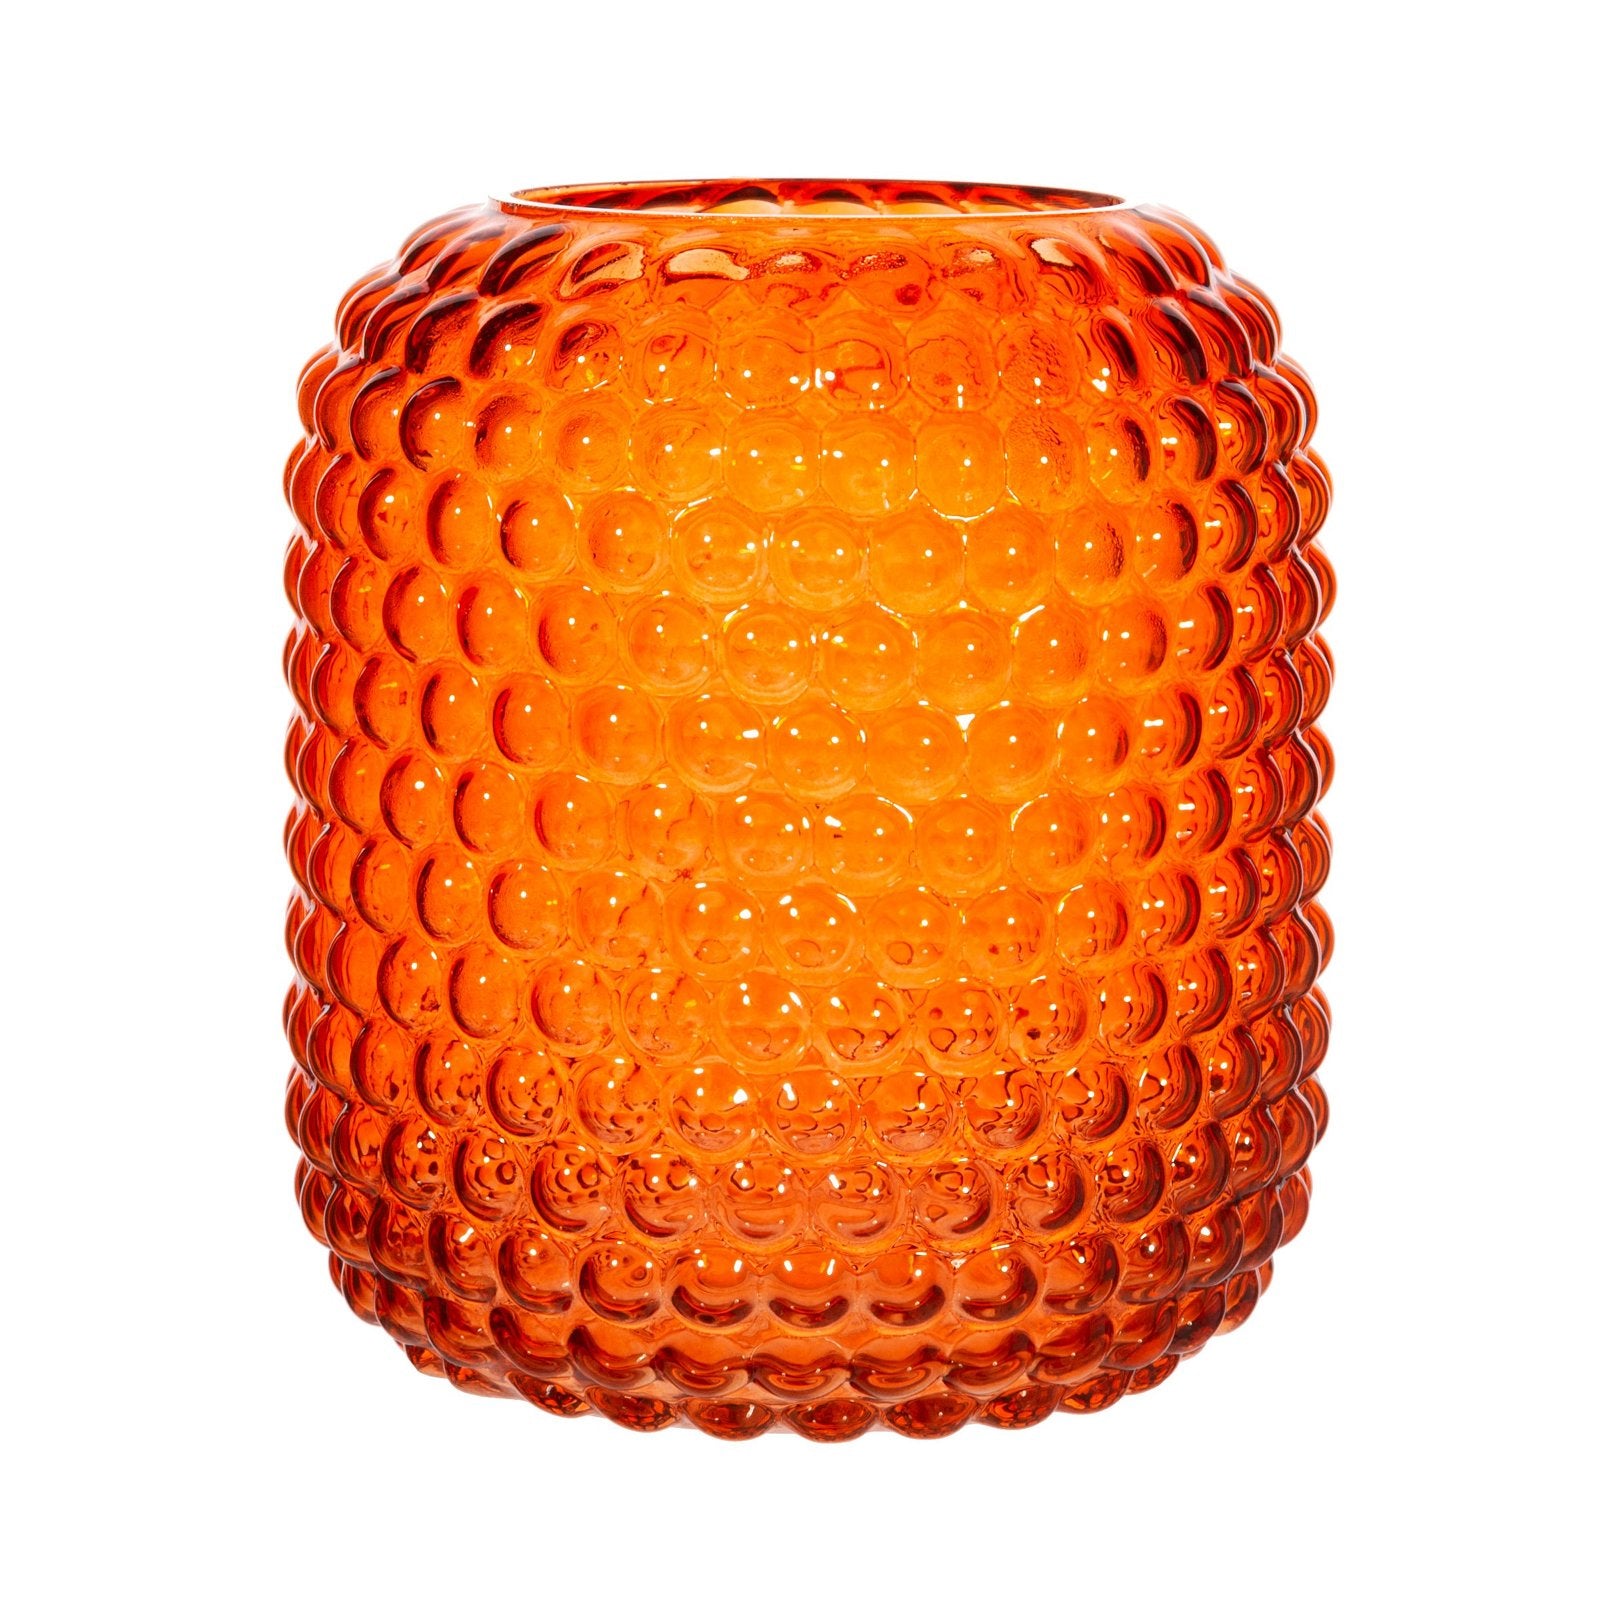 An amber coloured round vase